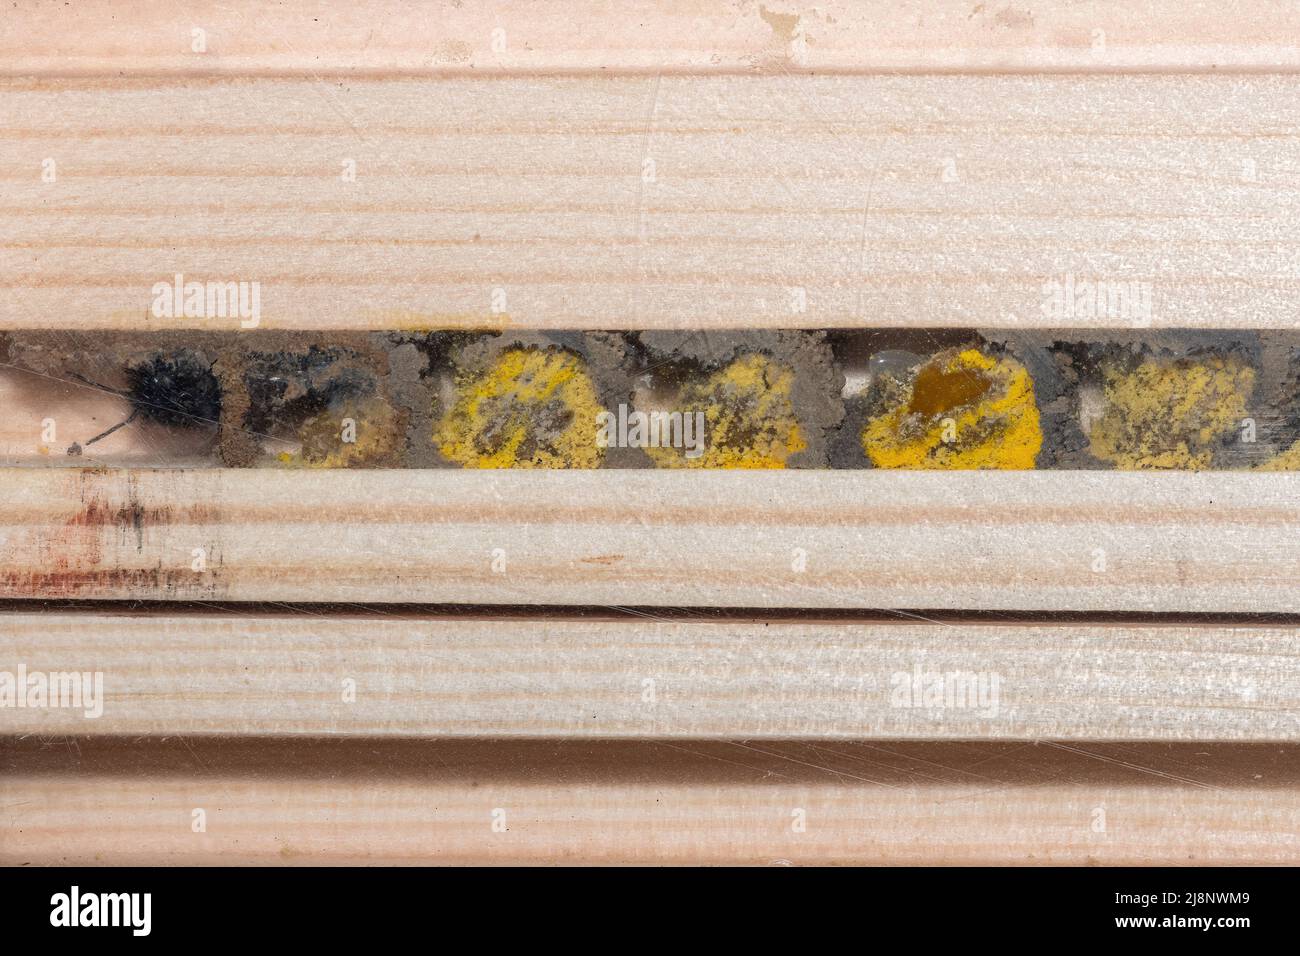 Red mason bee (Osmia bicornis) inside a bee hotel showing the pollen filled breeding cells and eggs divided by mud walls, UK Stock Photo